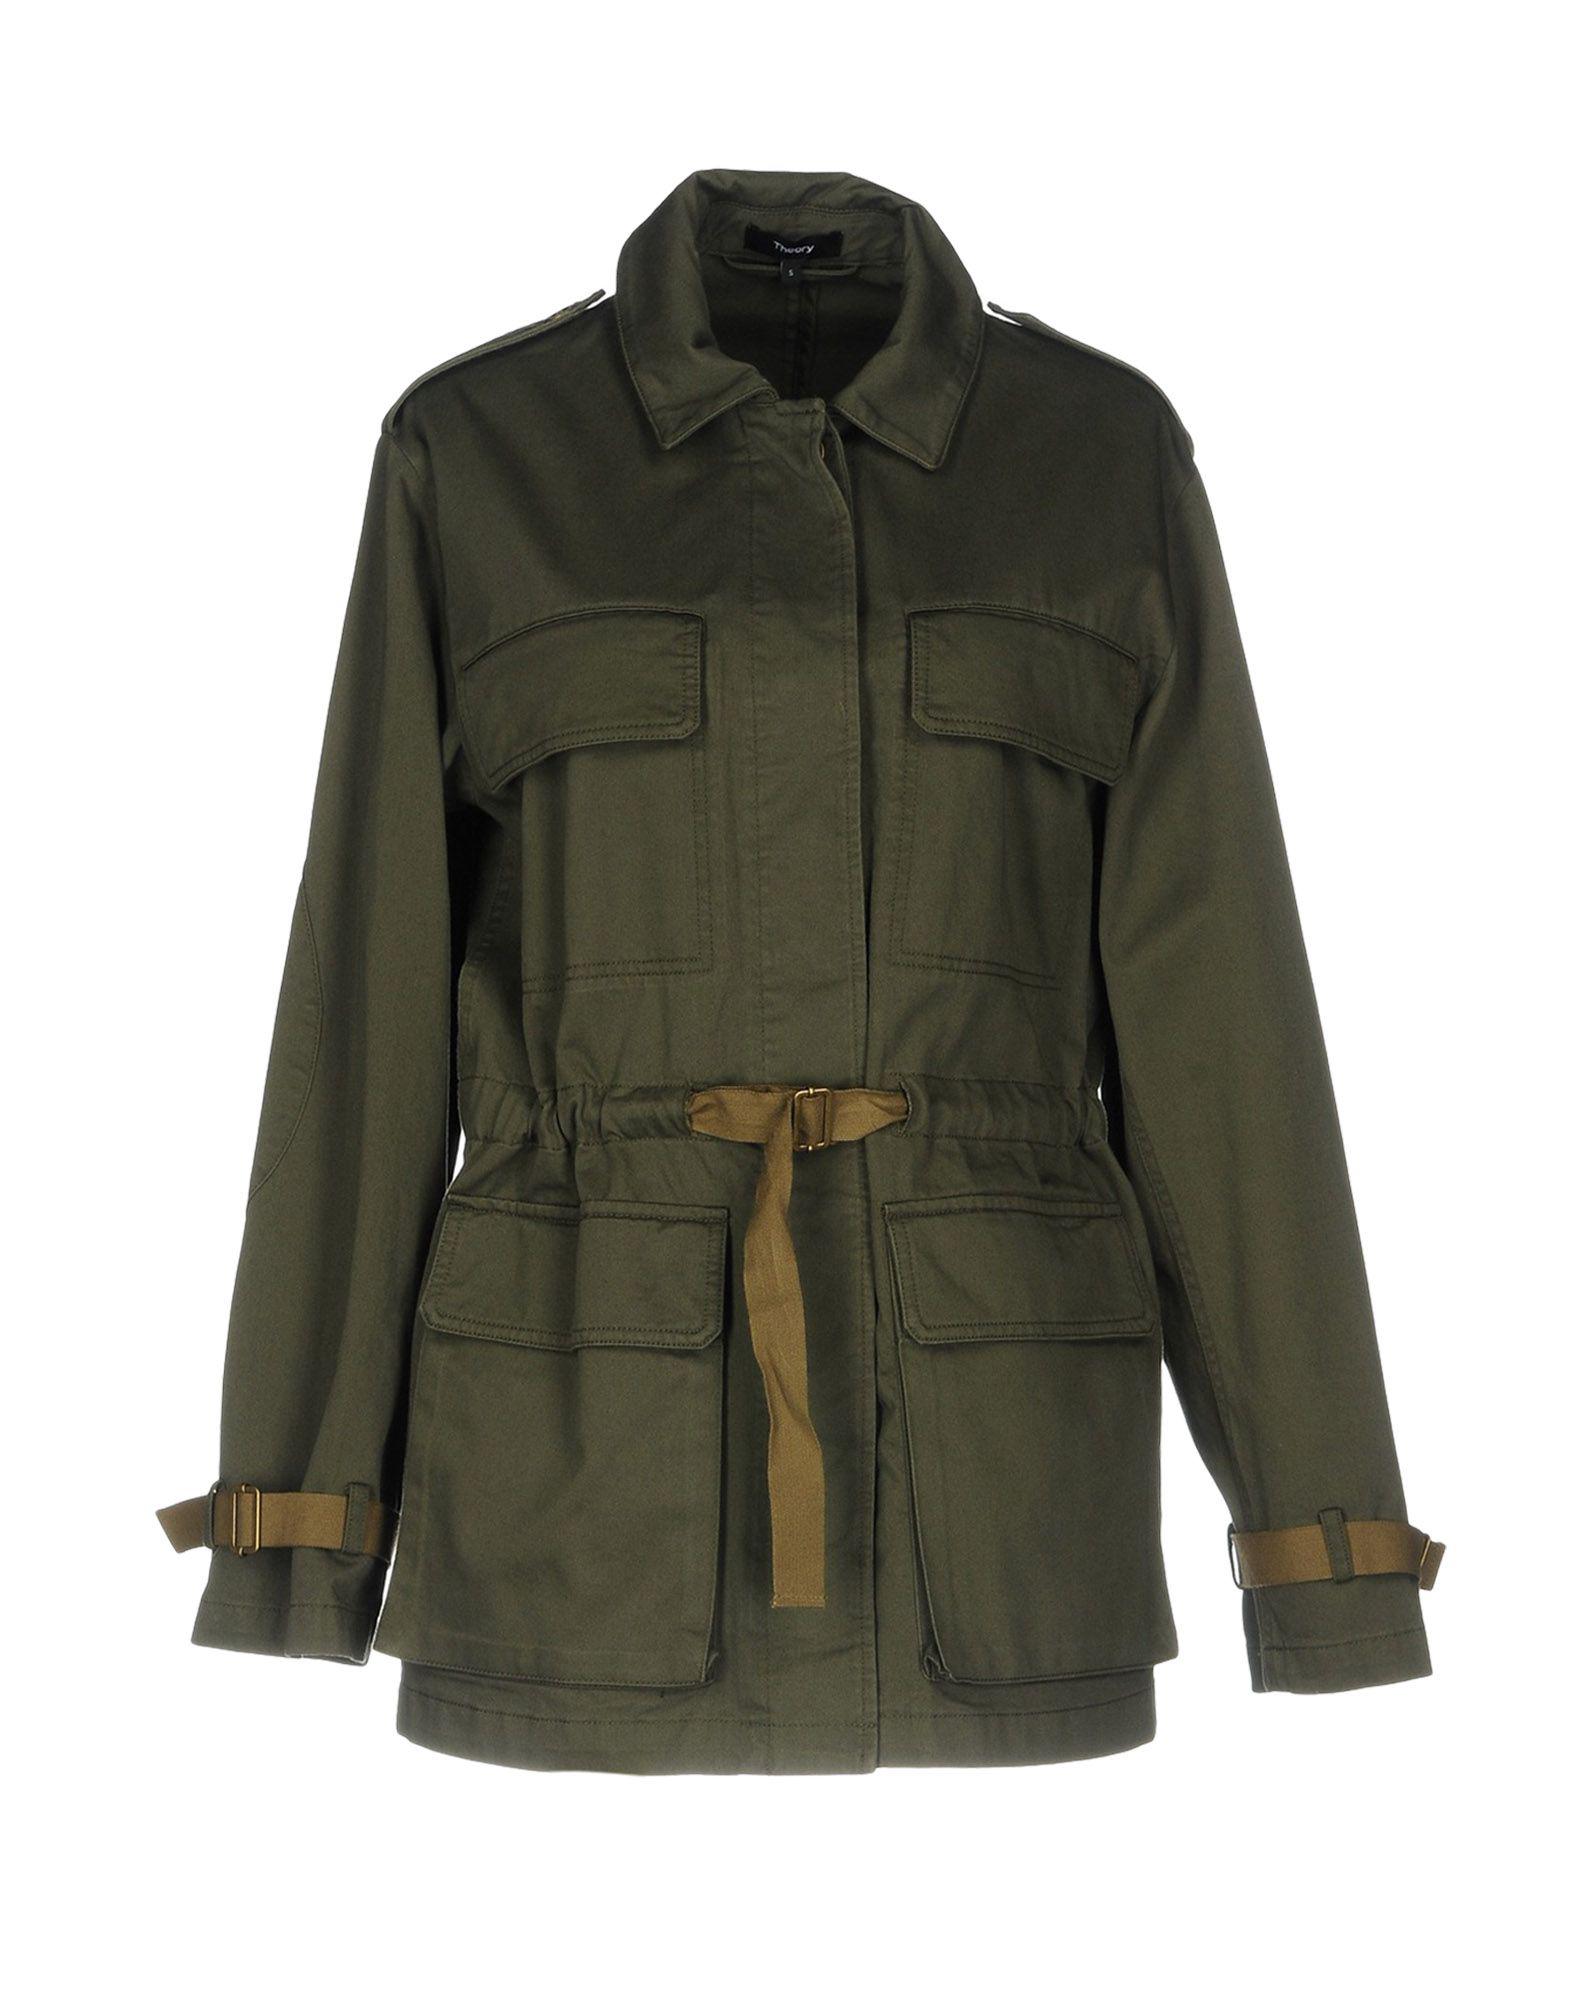 Theory Canvas Jacket in Military Green (Green) - Lyst